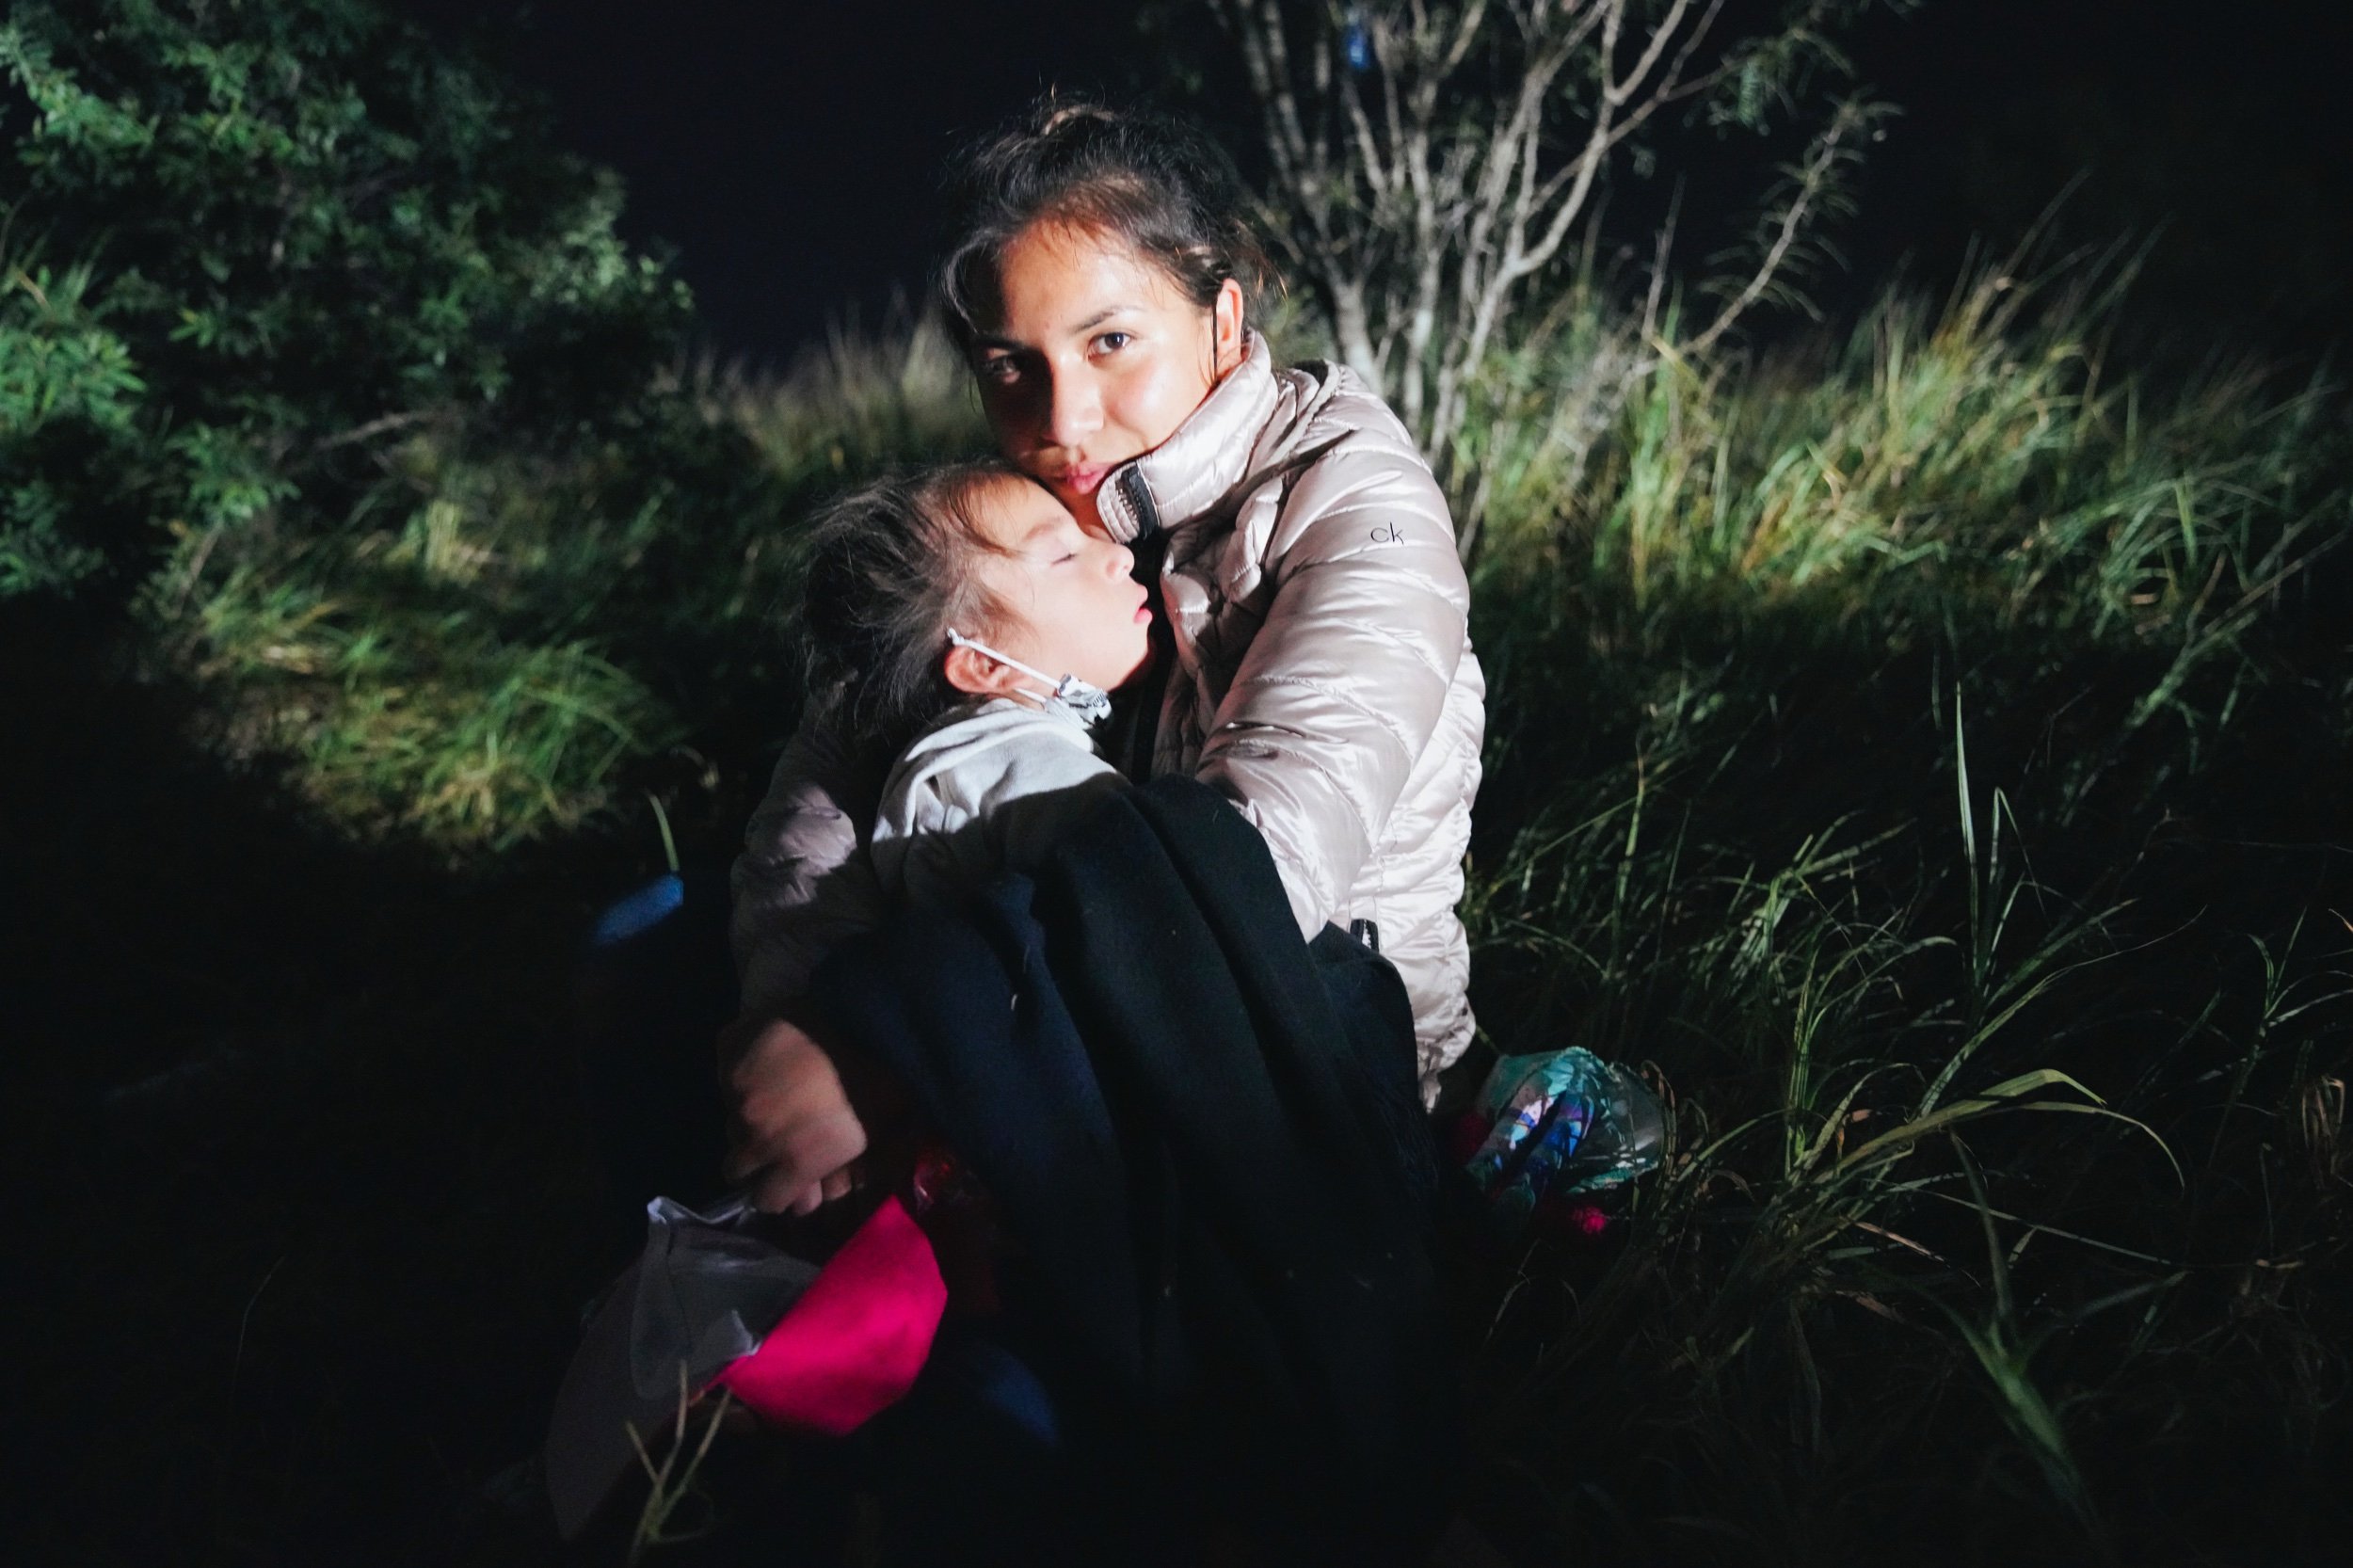  A migrant woman and her daughter wait in the long USA Border Patrol line, to be processed. This night more than 400 people crossed the Rio Grande, looking for asylum in the USA. July 2021. Roma, TX.  